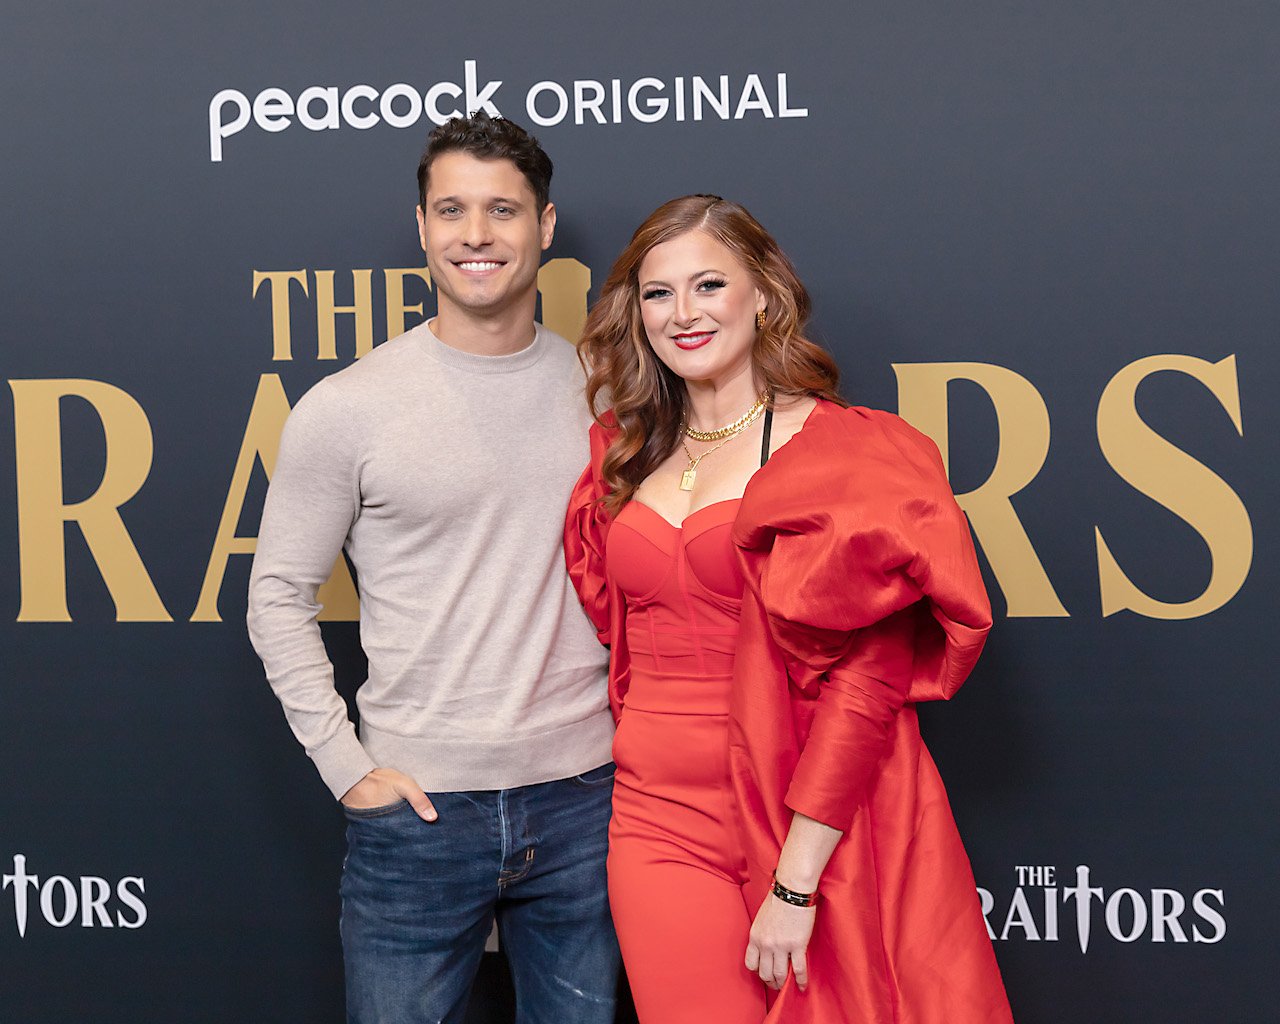 Rachel Reilly Says Cody Calafiore ‘Acted Differently Toward Me’ on ‘The Traitors’